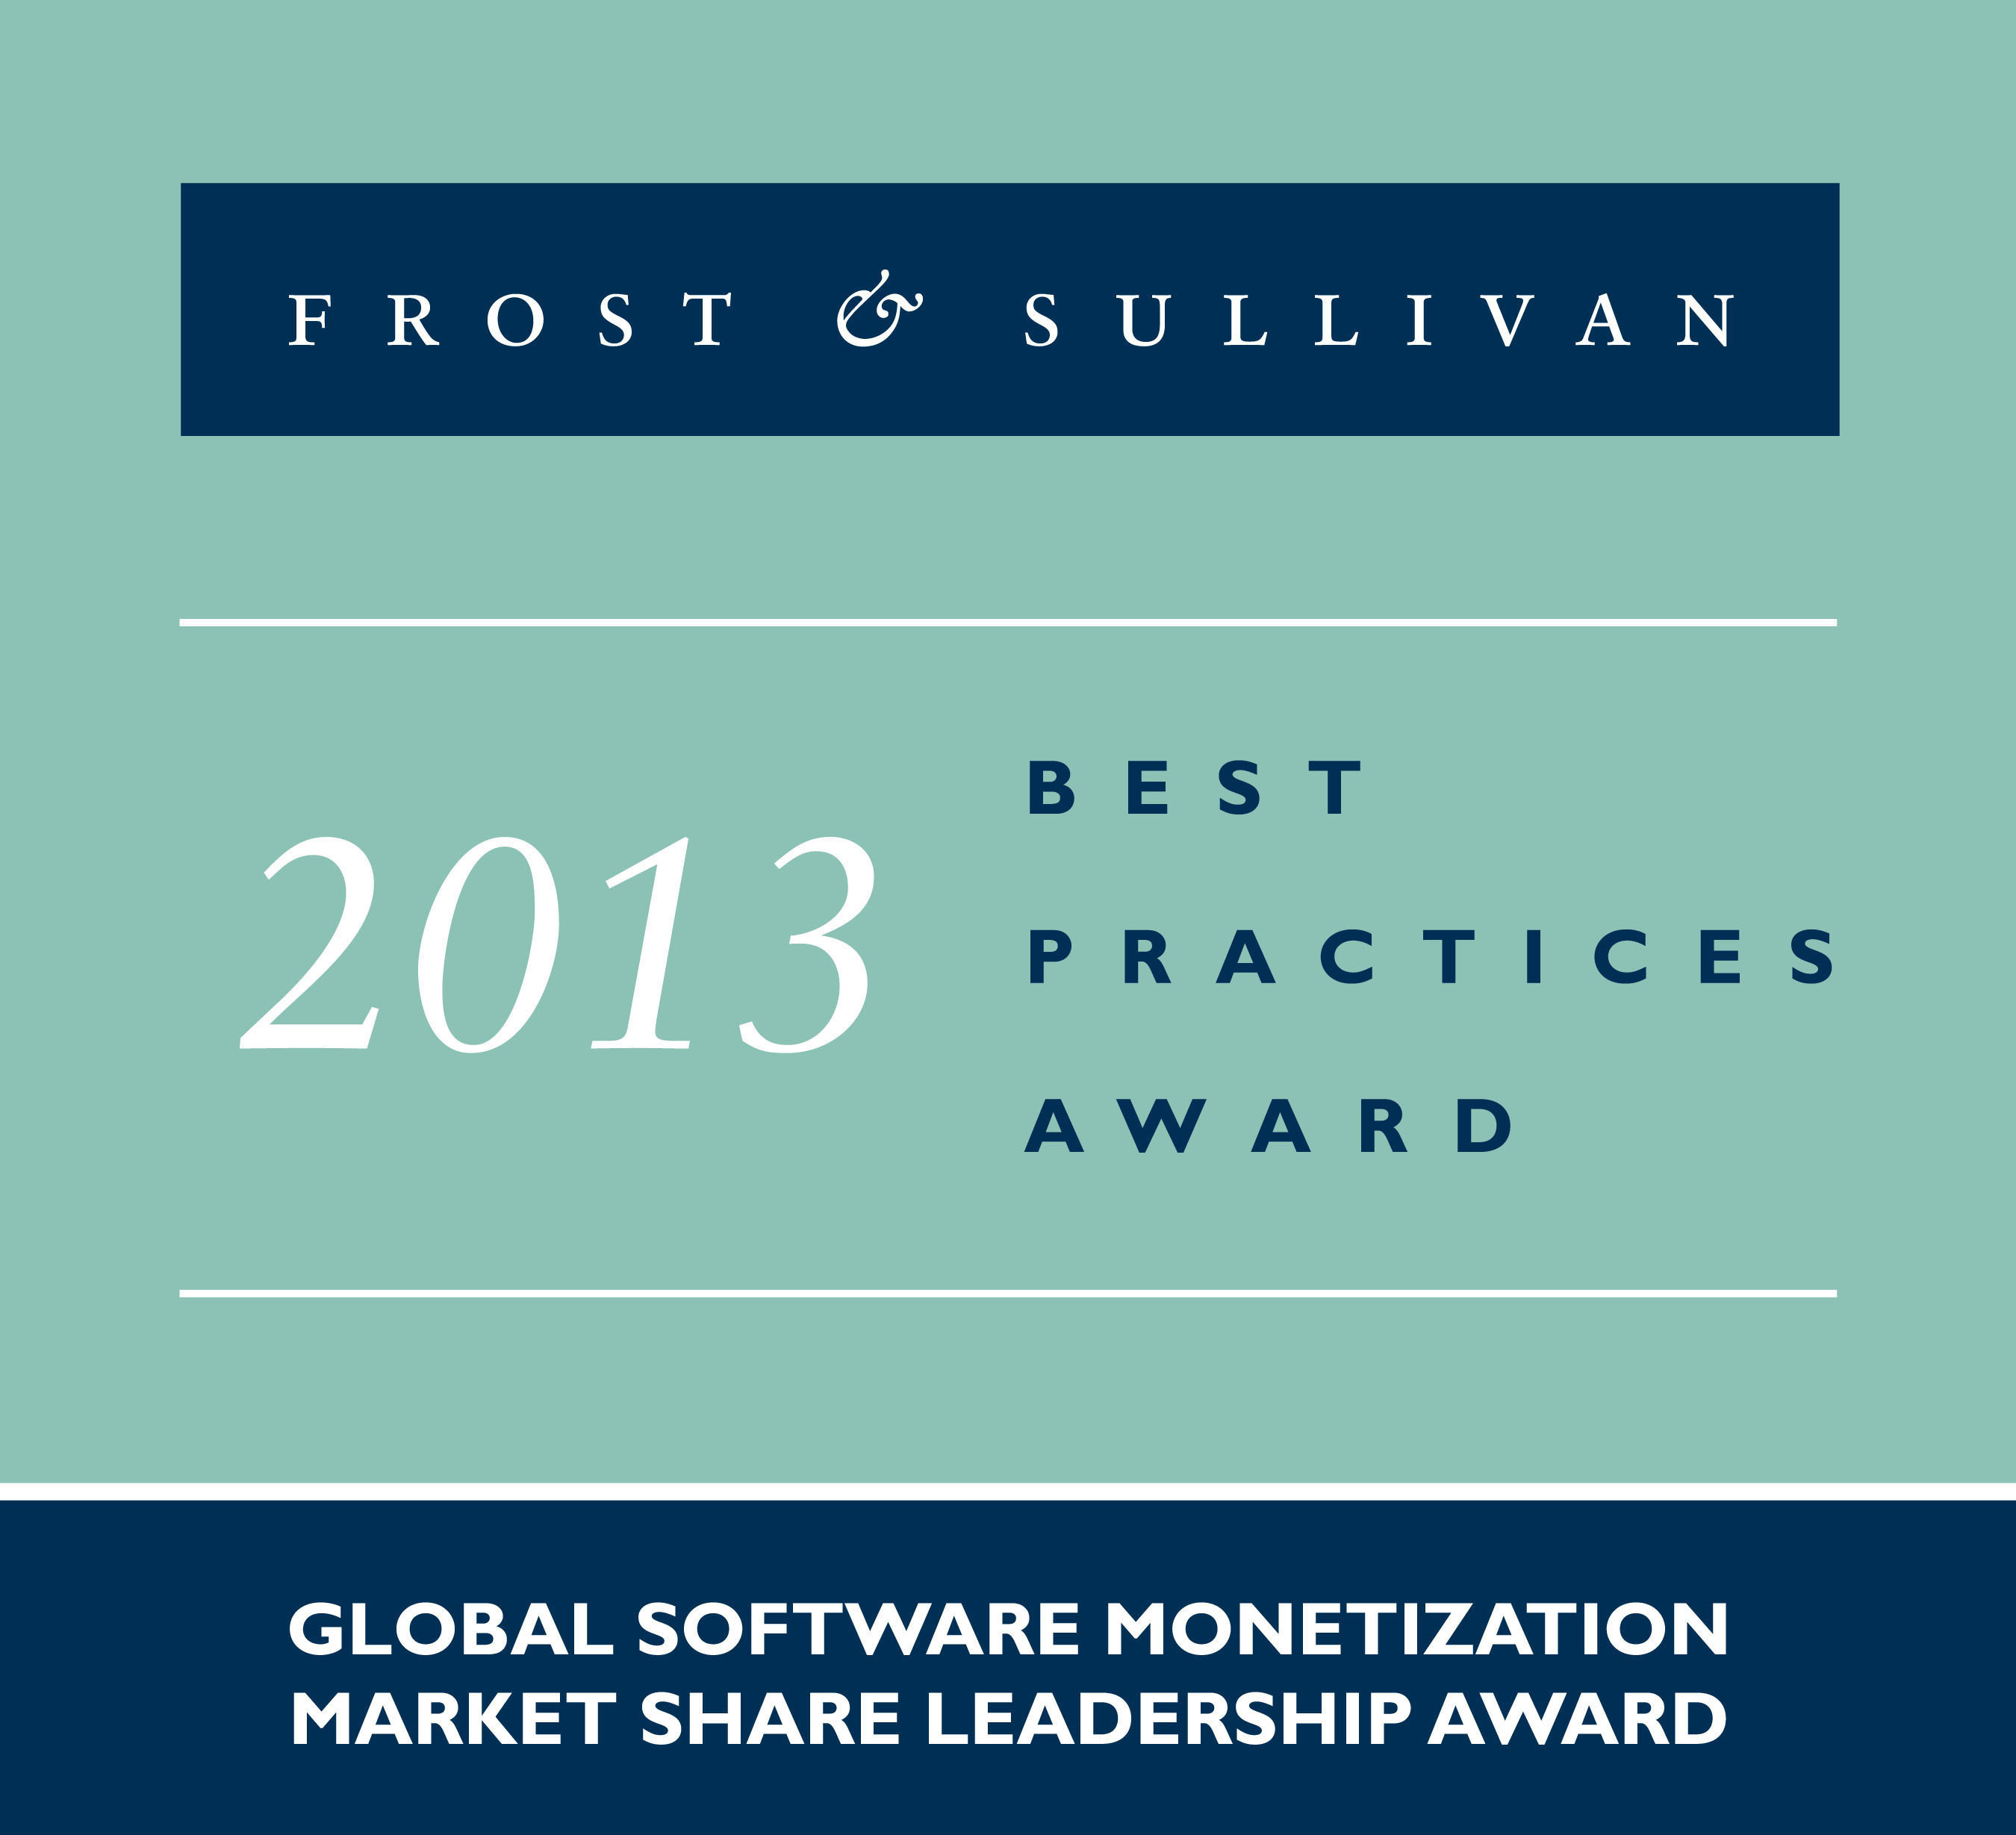 Frost & Sullivan has presented SafeNet with the prestigious Market Share Leadership Award for its leadership in the global software monetization market. (PRNewsFoto/SAFENET)